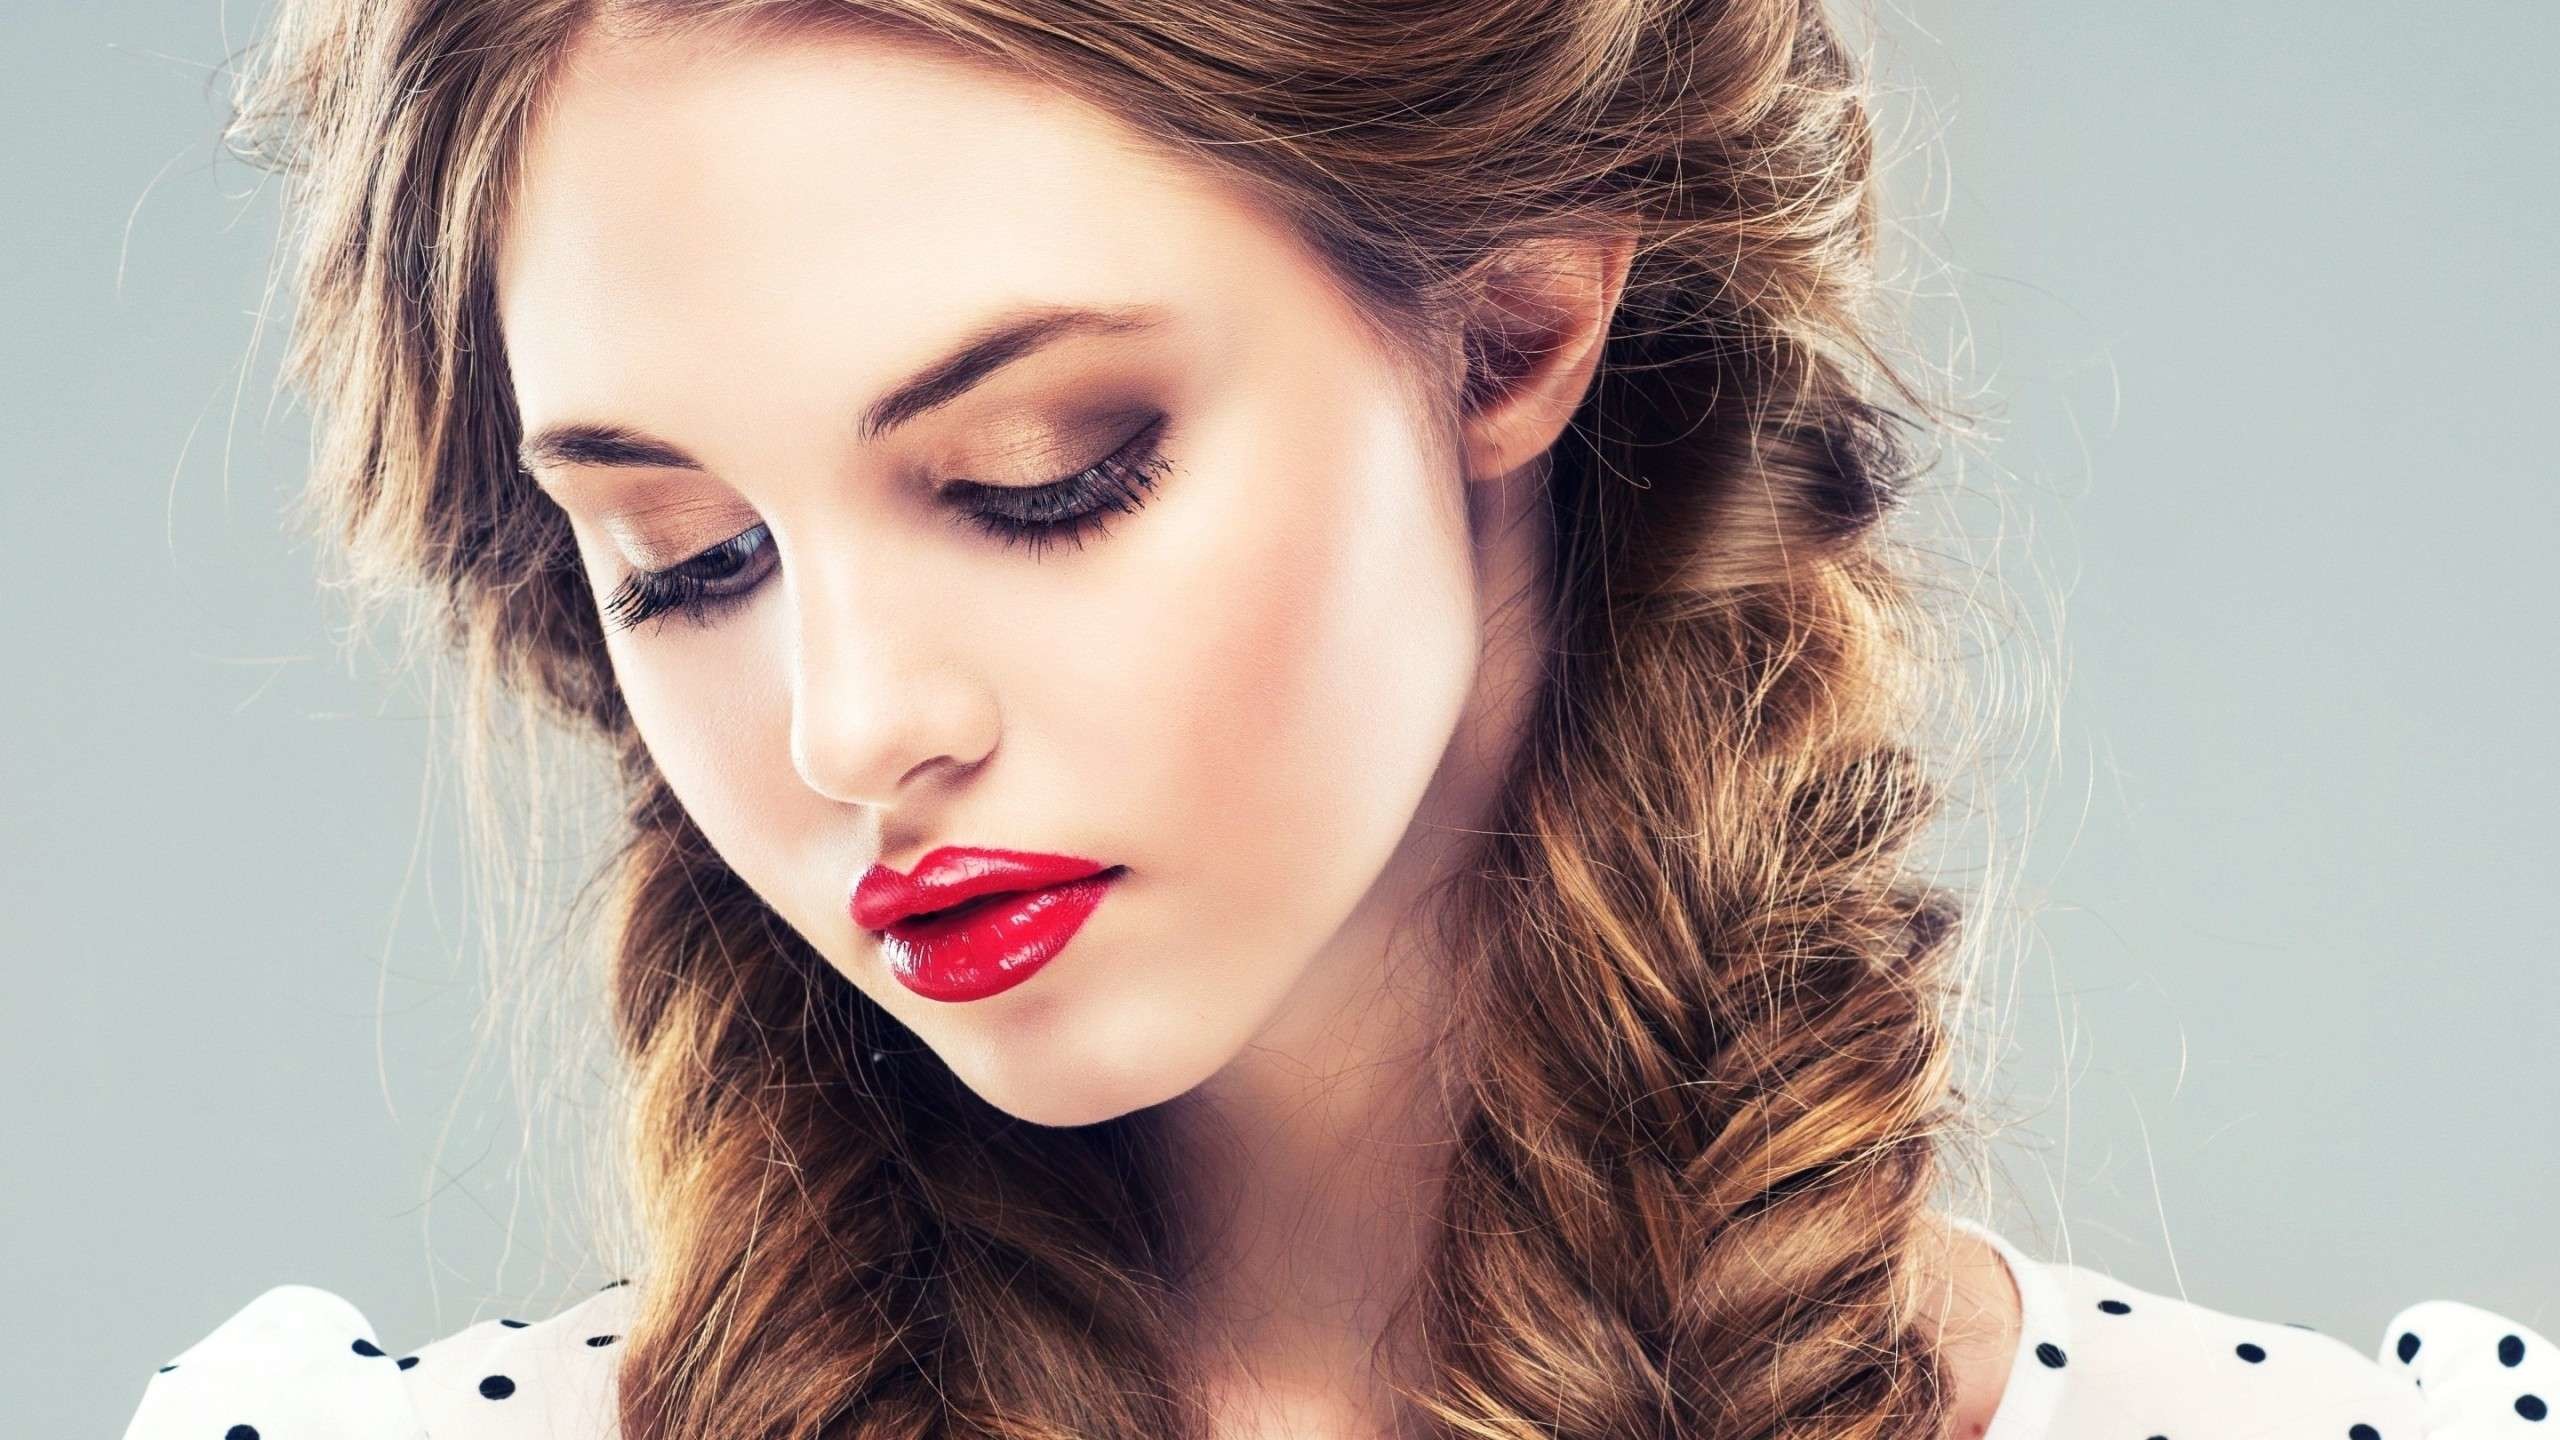 girl wallpaper download,hair,lip,face,eyebrow,hairstyle